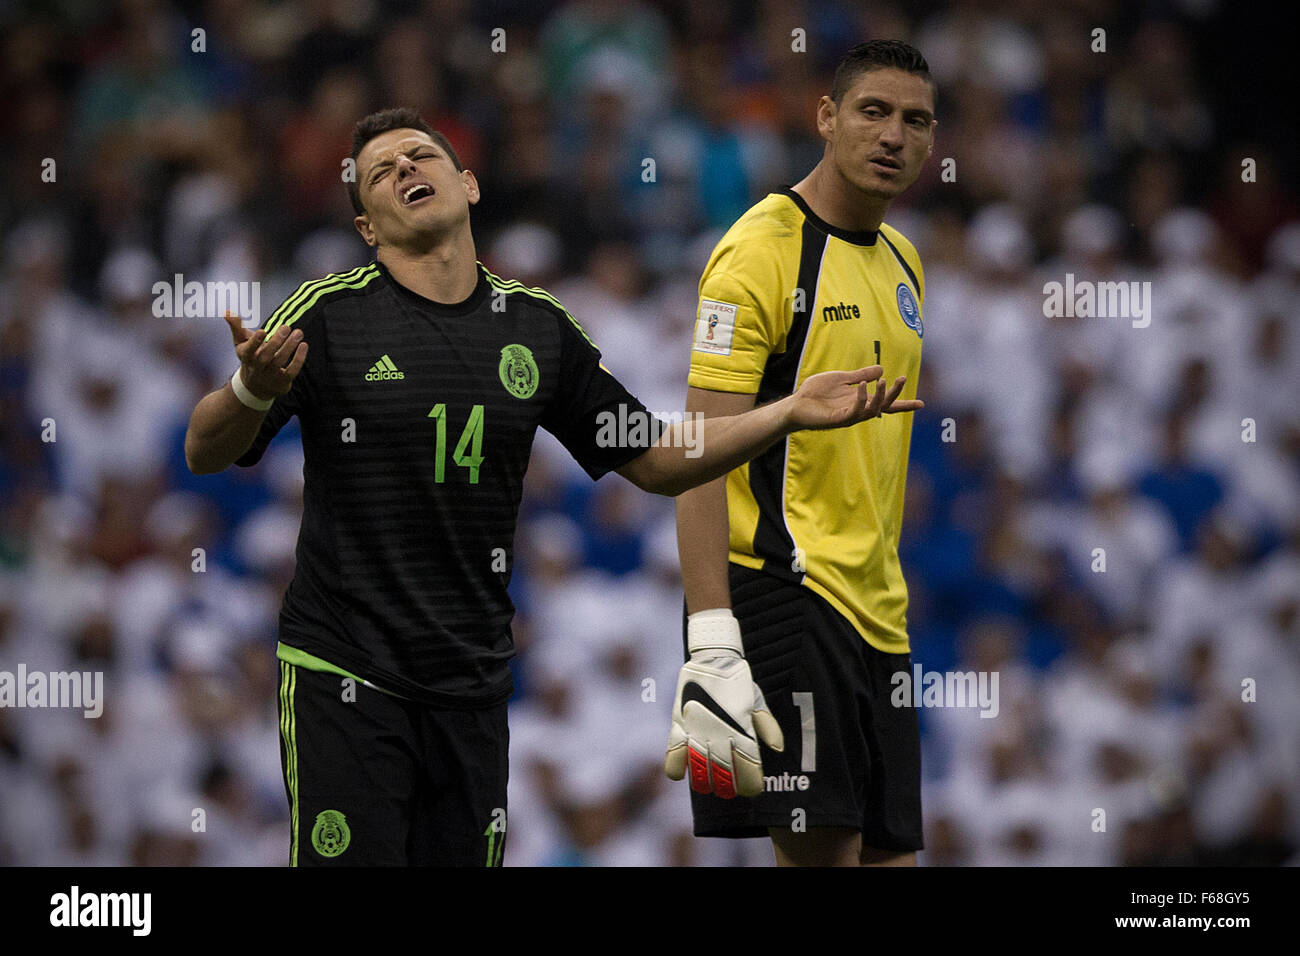 Mexico City, Mexico. 13th Nov, 2015. Javier Hernandez (L) of Mexico reacts during the 2018 Russia World Cup qualifying match between Mexico and El Salvador at Azteca Stadium in Mexico City, capital of Mexico, on Nov. 13, 2015. Mexico won 3-0. Credit:  Pedro Mera/Xinhua/Alamy Live News Stock Photo